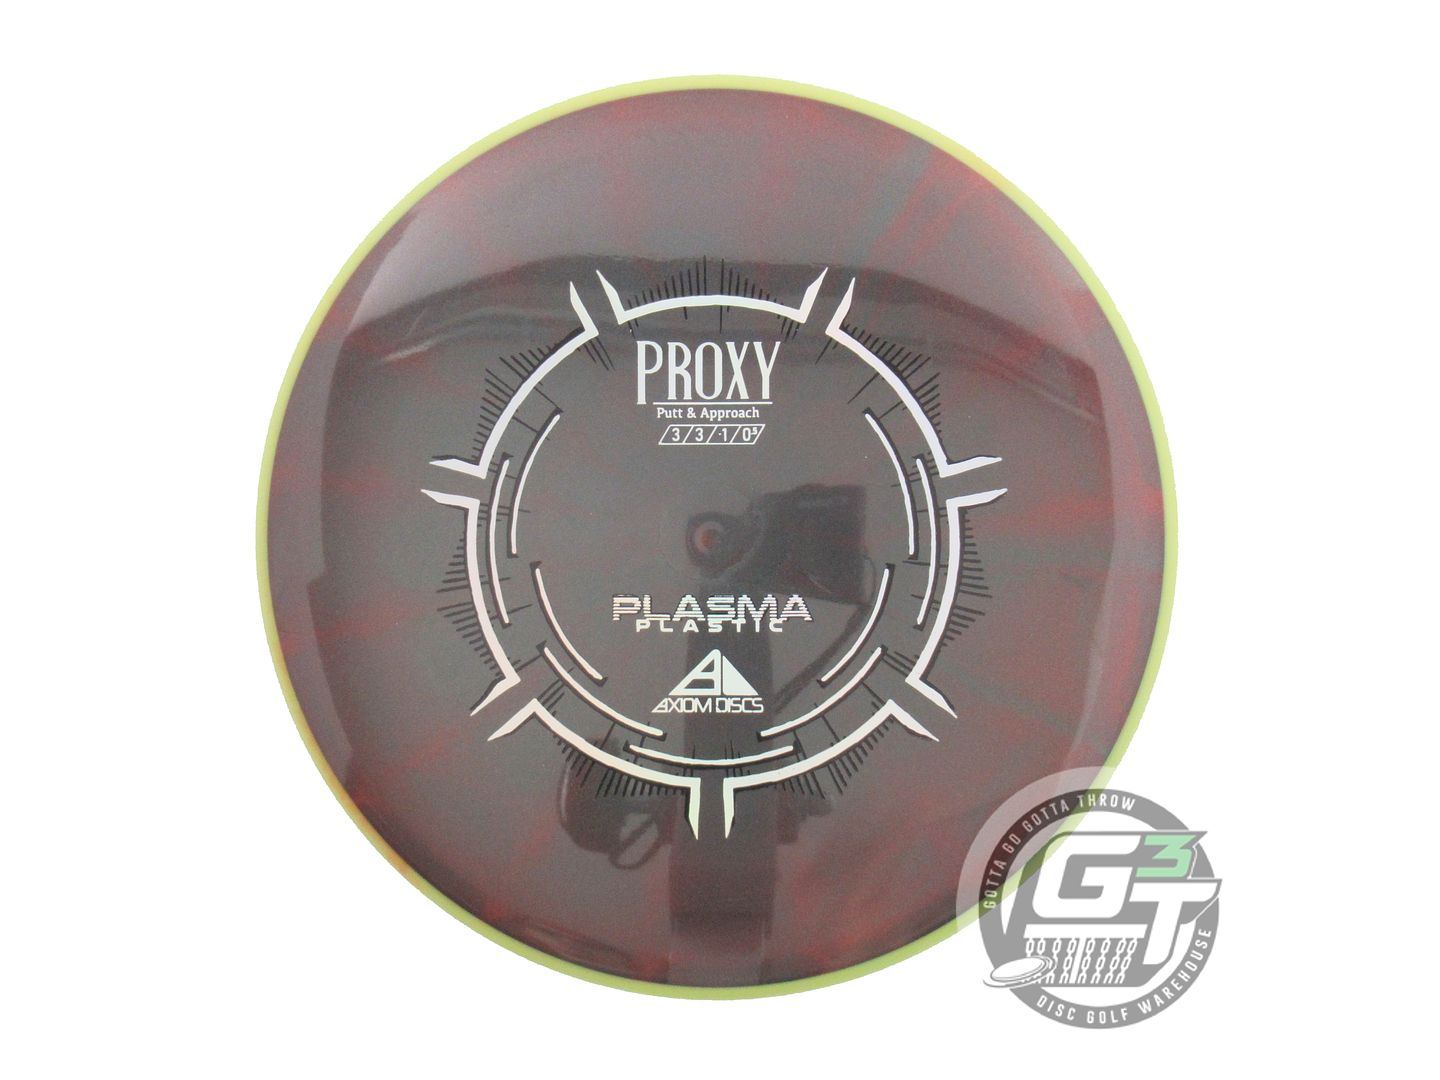 Axiom Plasma Proxy Putter Golf Disc (Individually Listed)